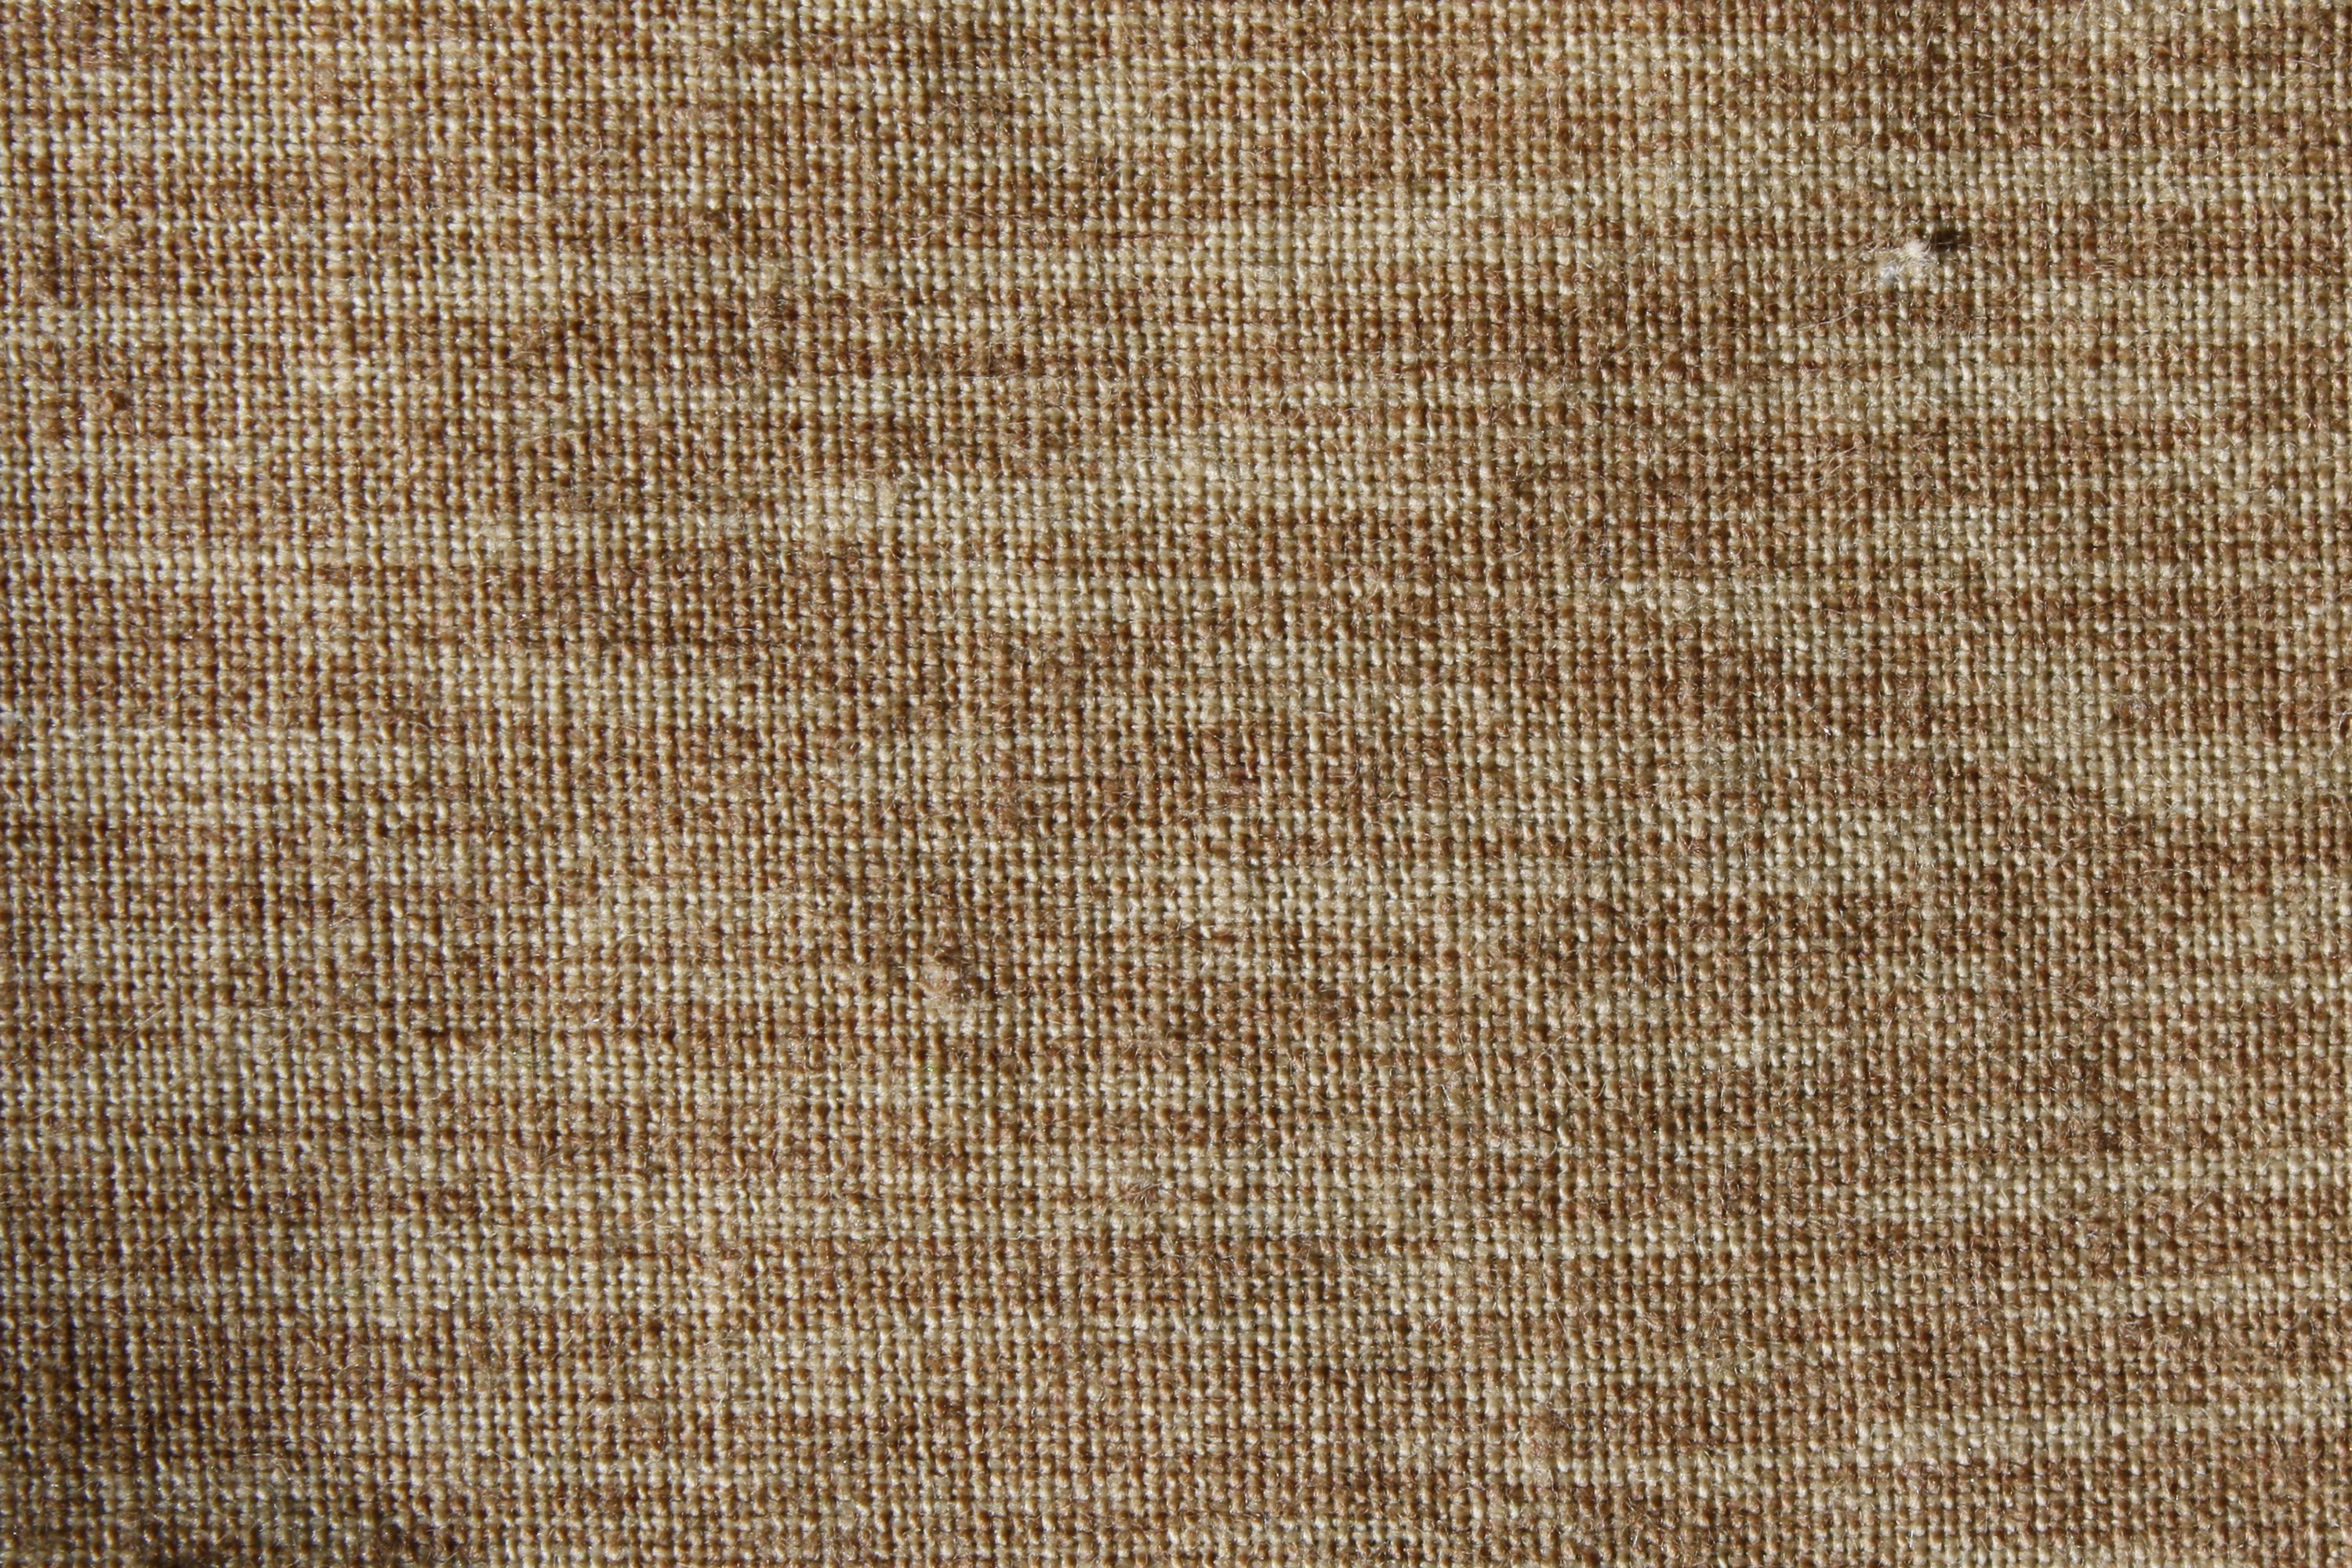 Brown Woven Fabric Close Up Texture Picture Free Photograph Photos